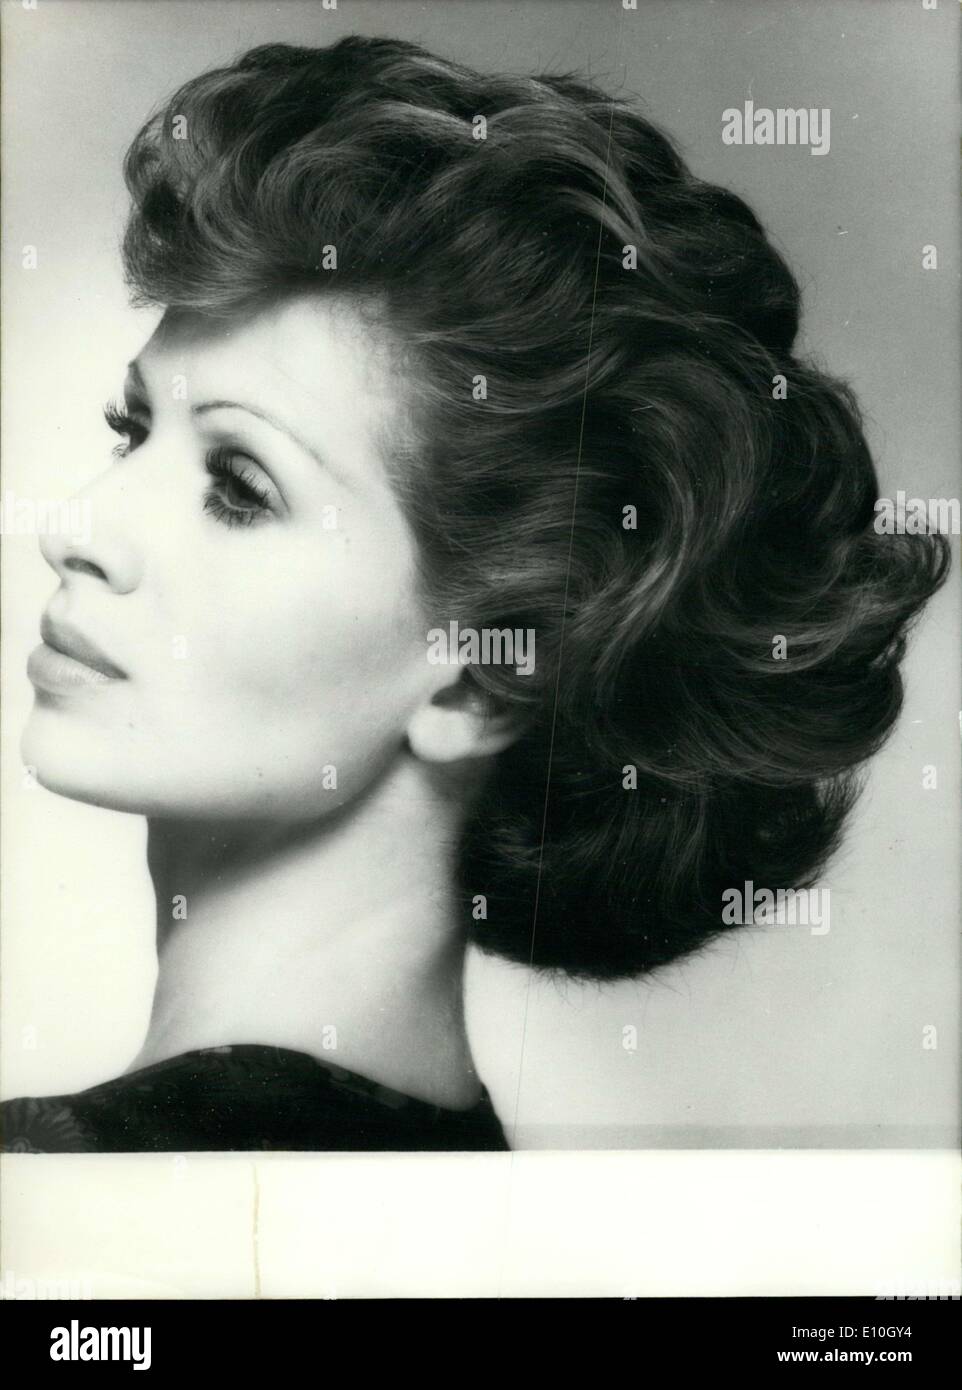 Jan. 31, 1973 - In Damia's copper-colored hair, the highlights emphasize its lightness on top in opposition to the full-bodied, Stock Photo